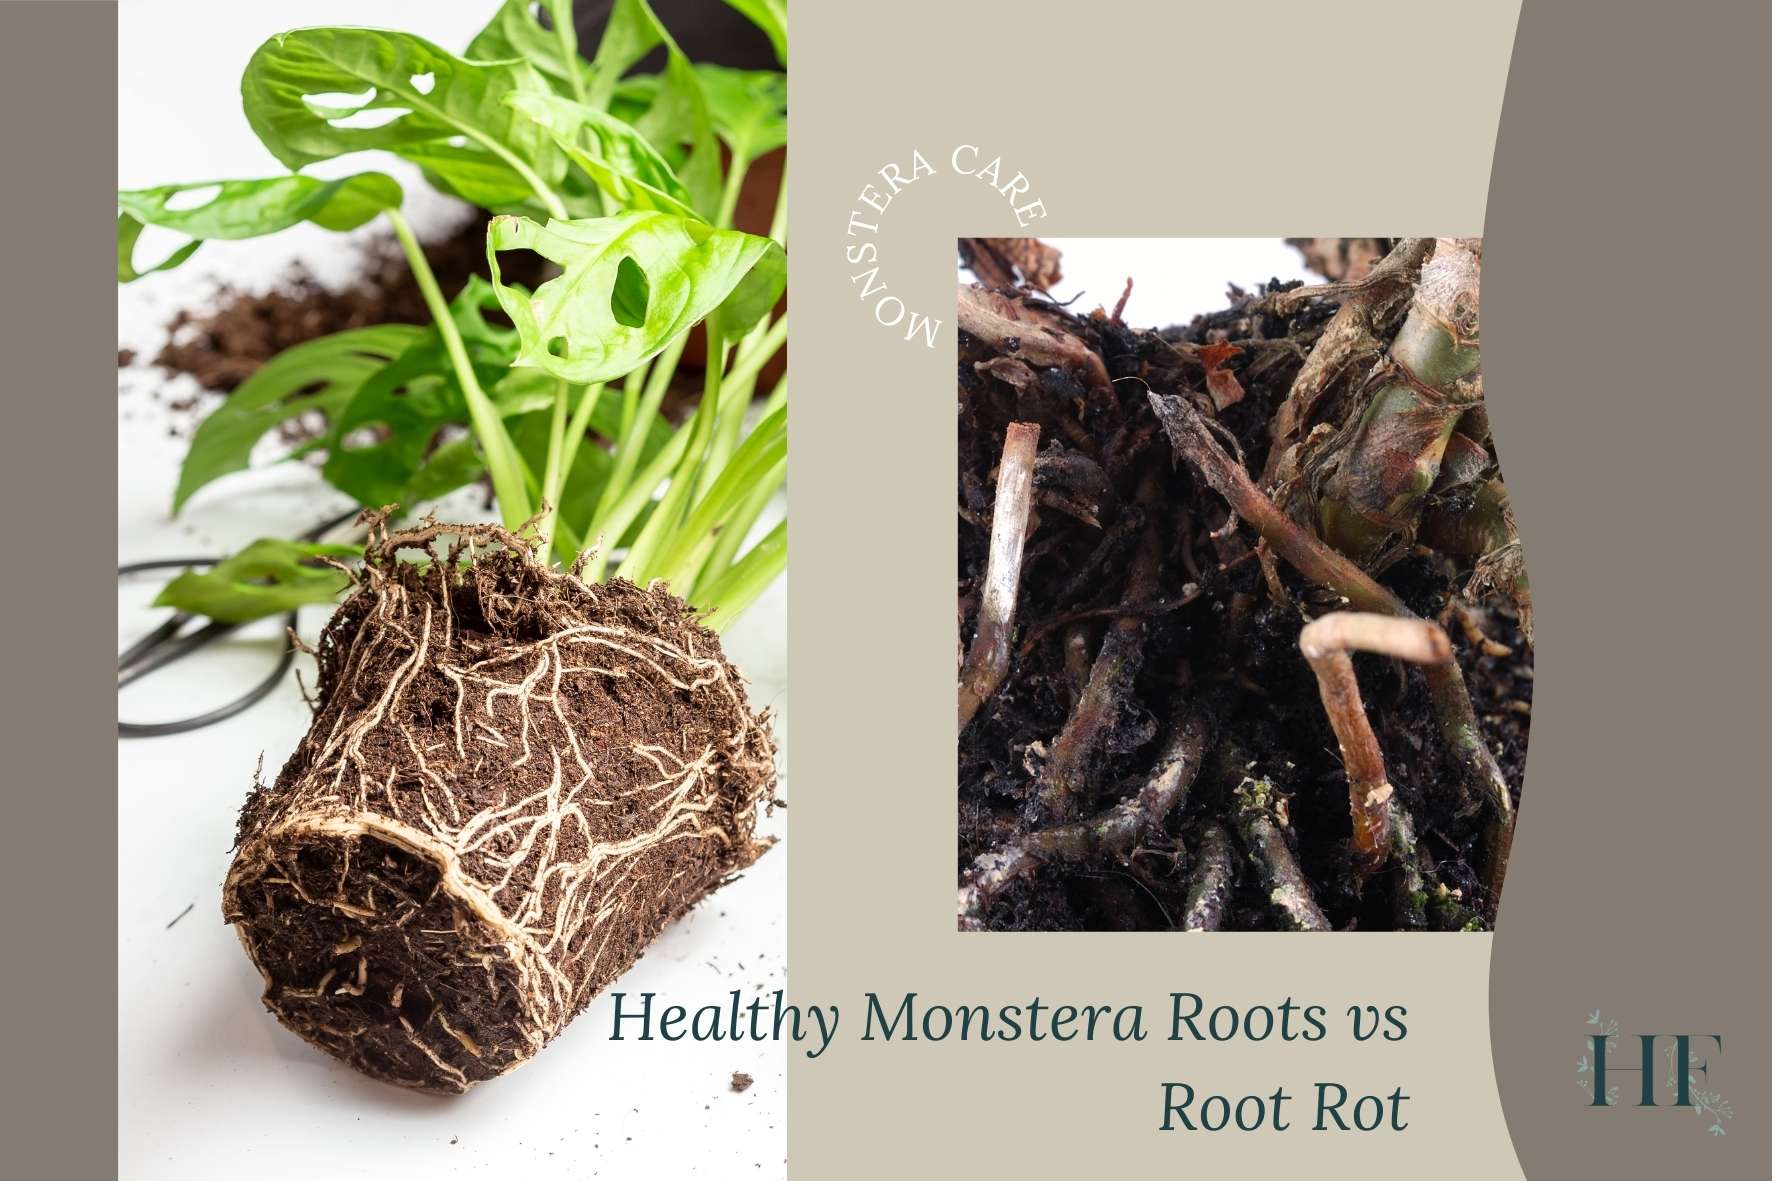 monstera-root-rot-vs-healthy-roots